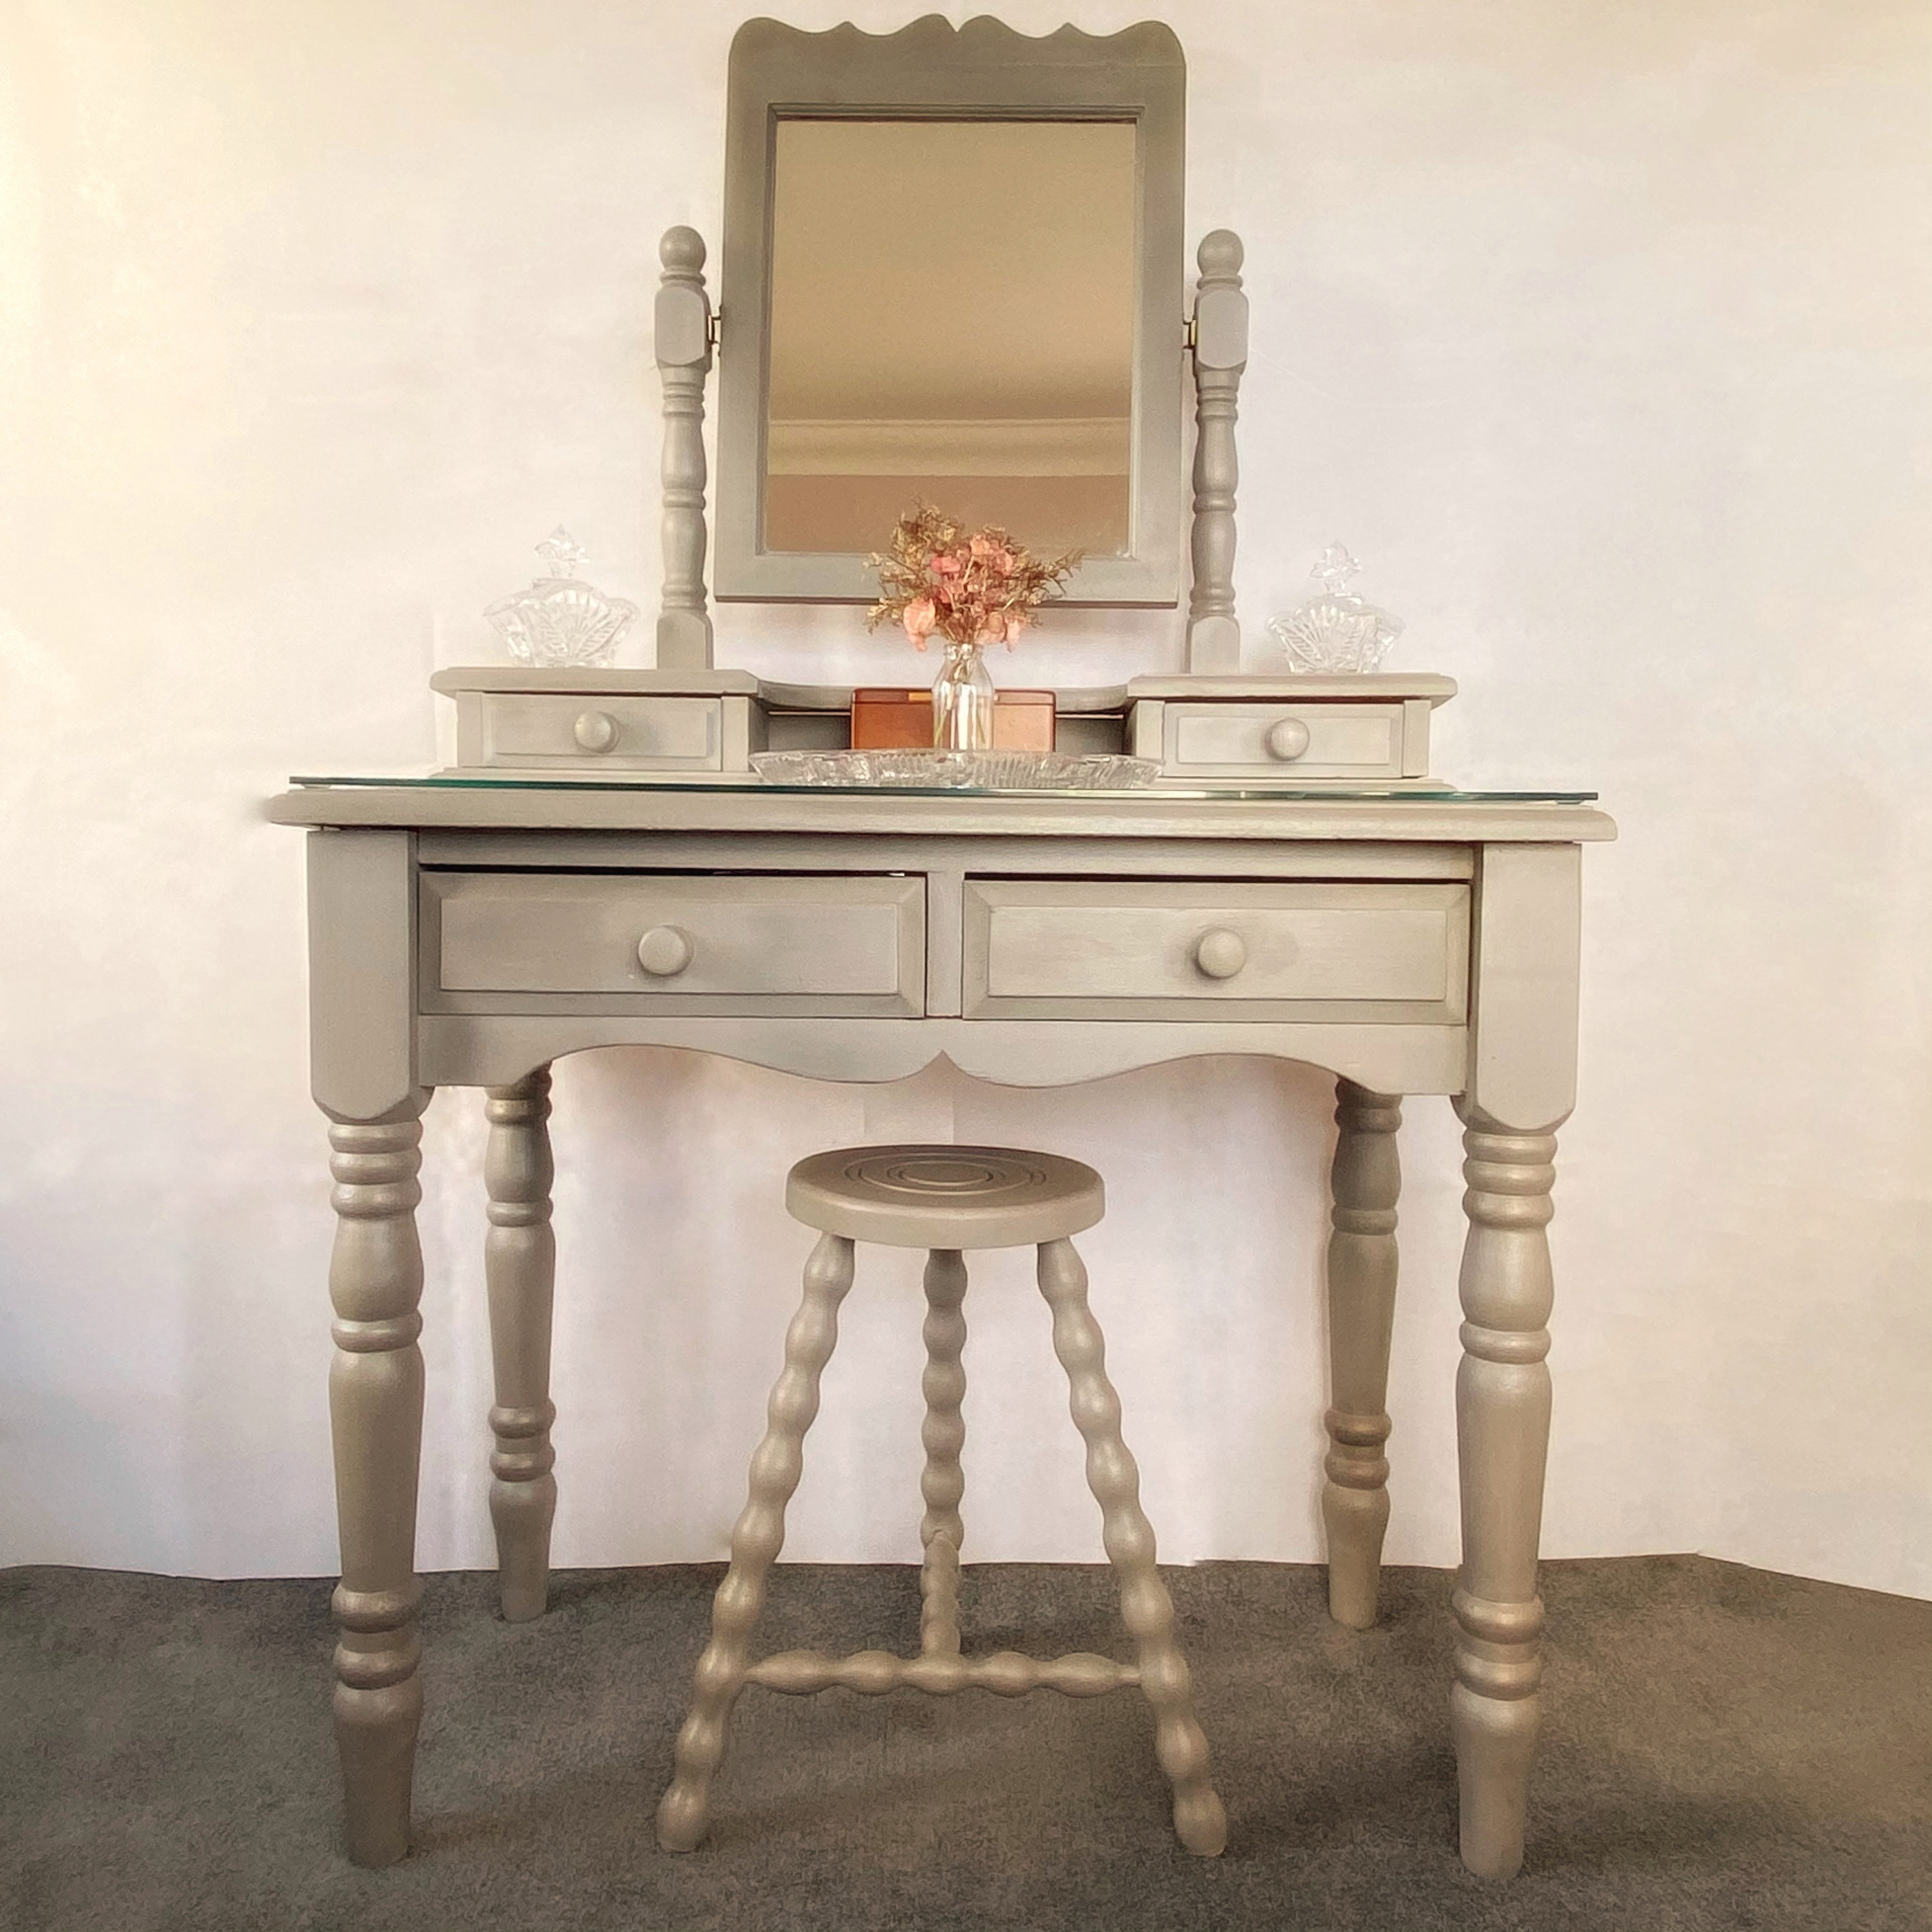 Ducal 8 drawer pine kneehole dressing table/ desk With Pine stool 